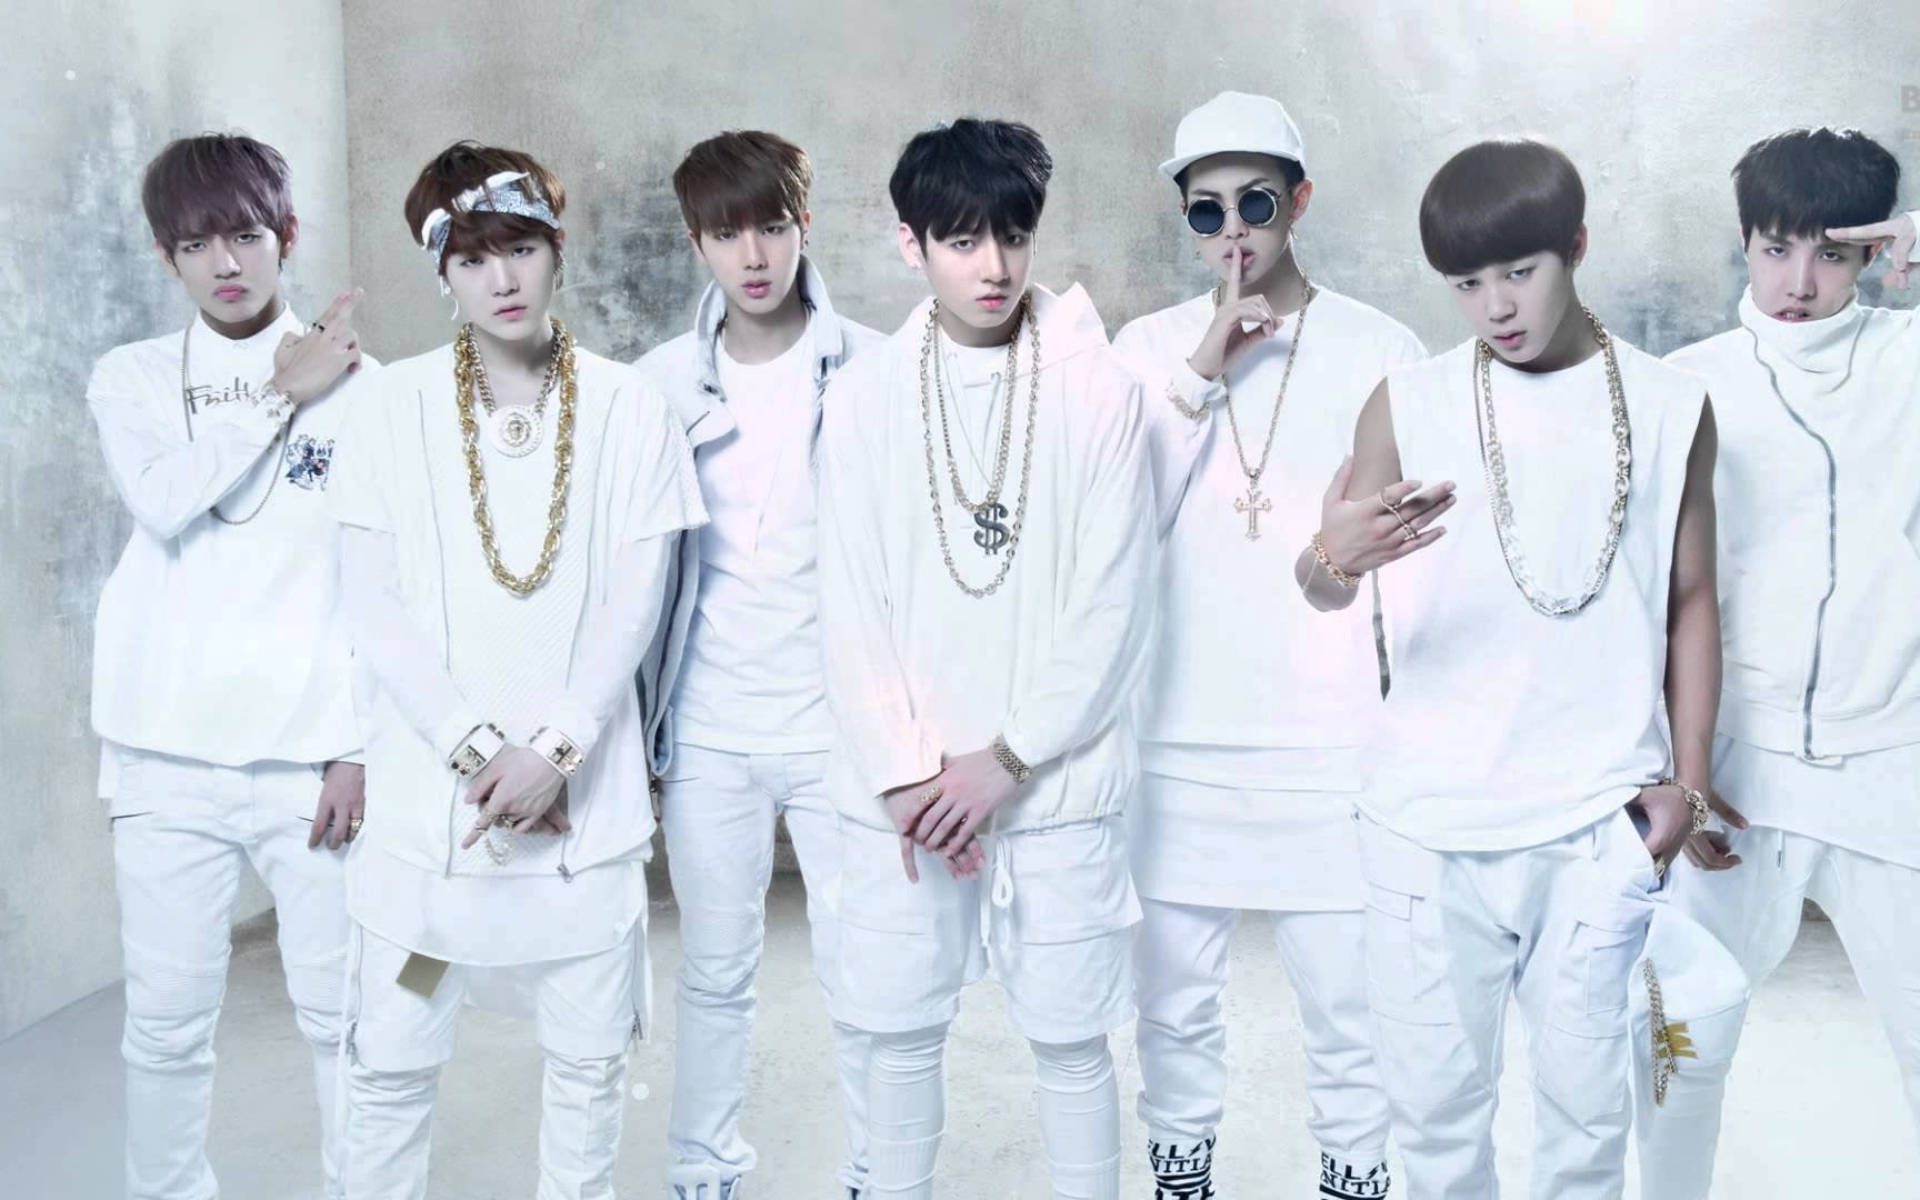 All White Bts Group Photo